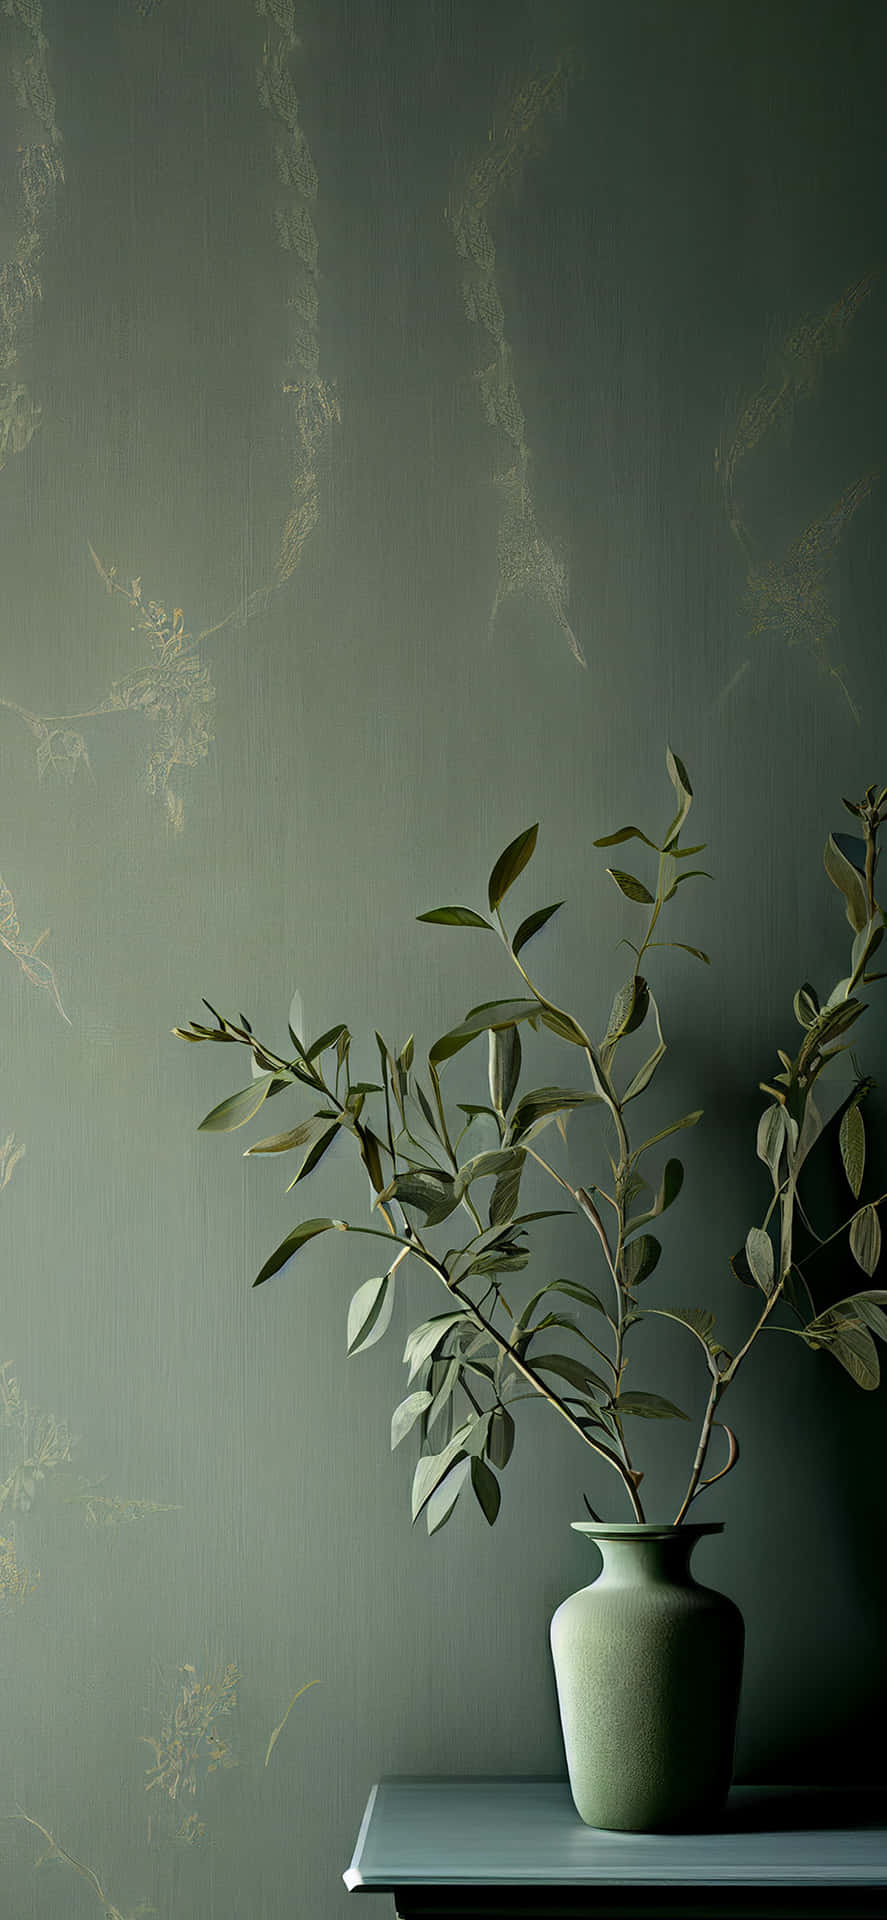 Relax and experience the calming energy of a sage green aesthetic